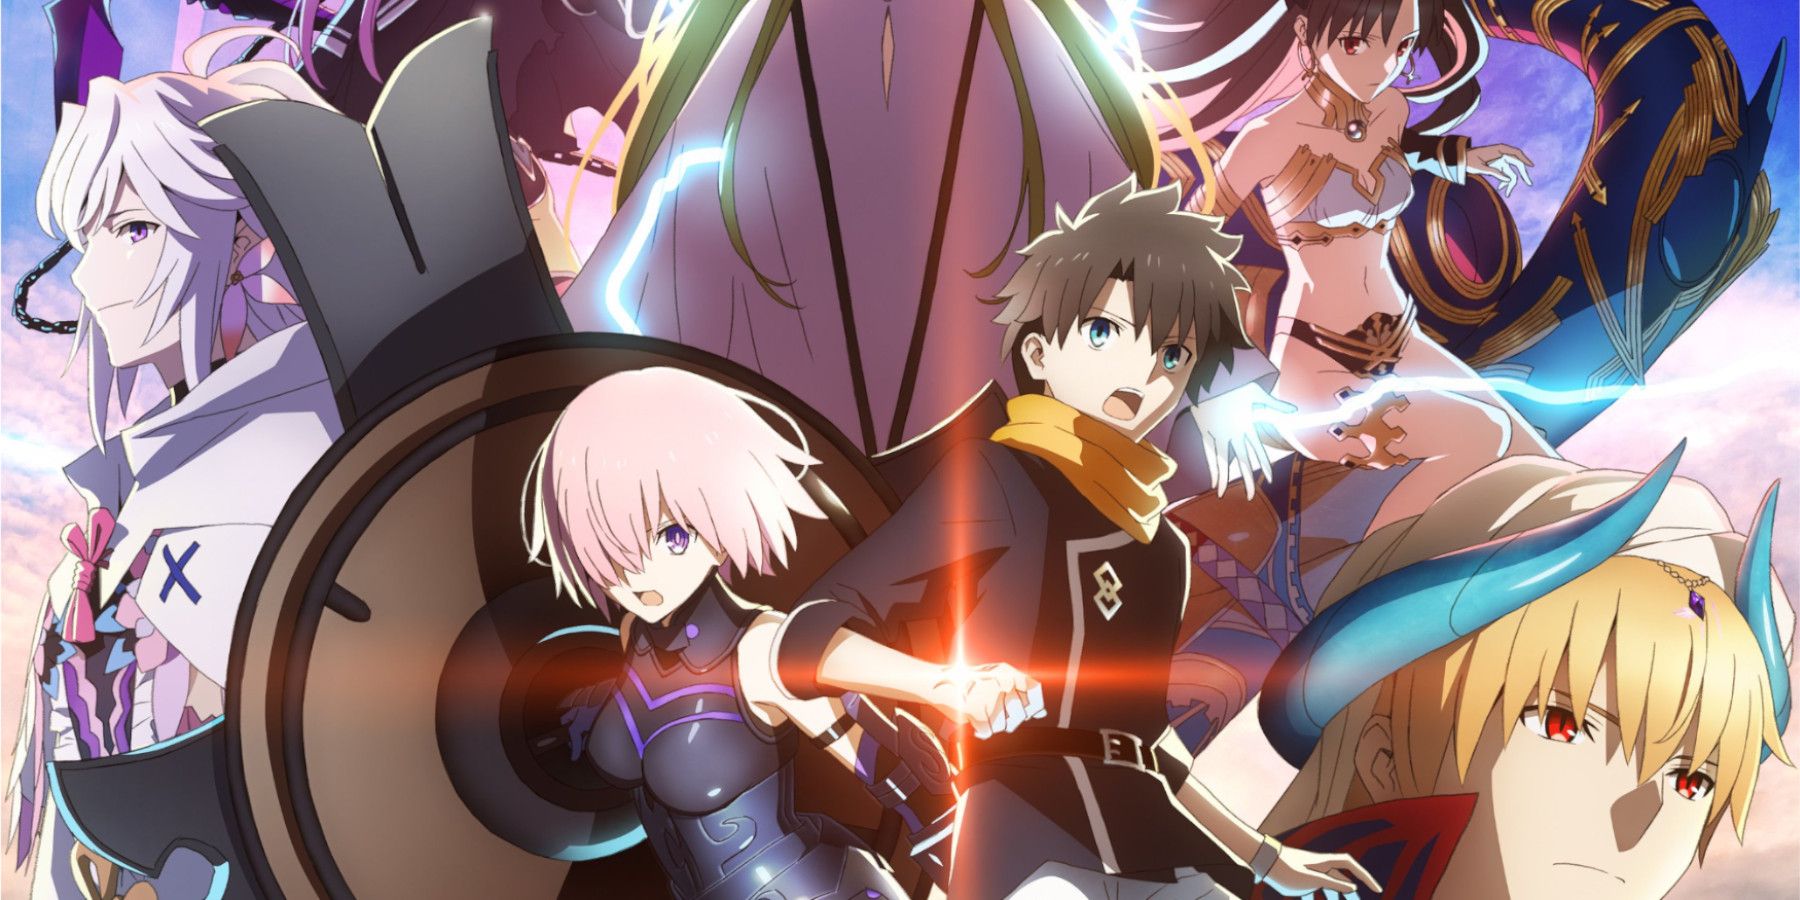 Fate/Grand Order Final Singularity's Latest Production News & Story Details